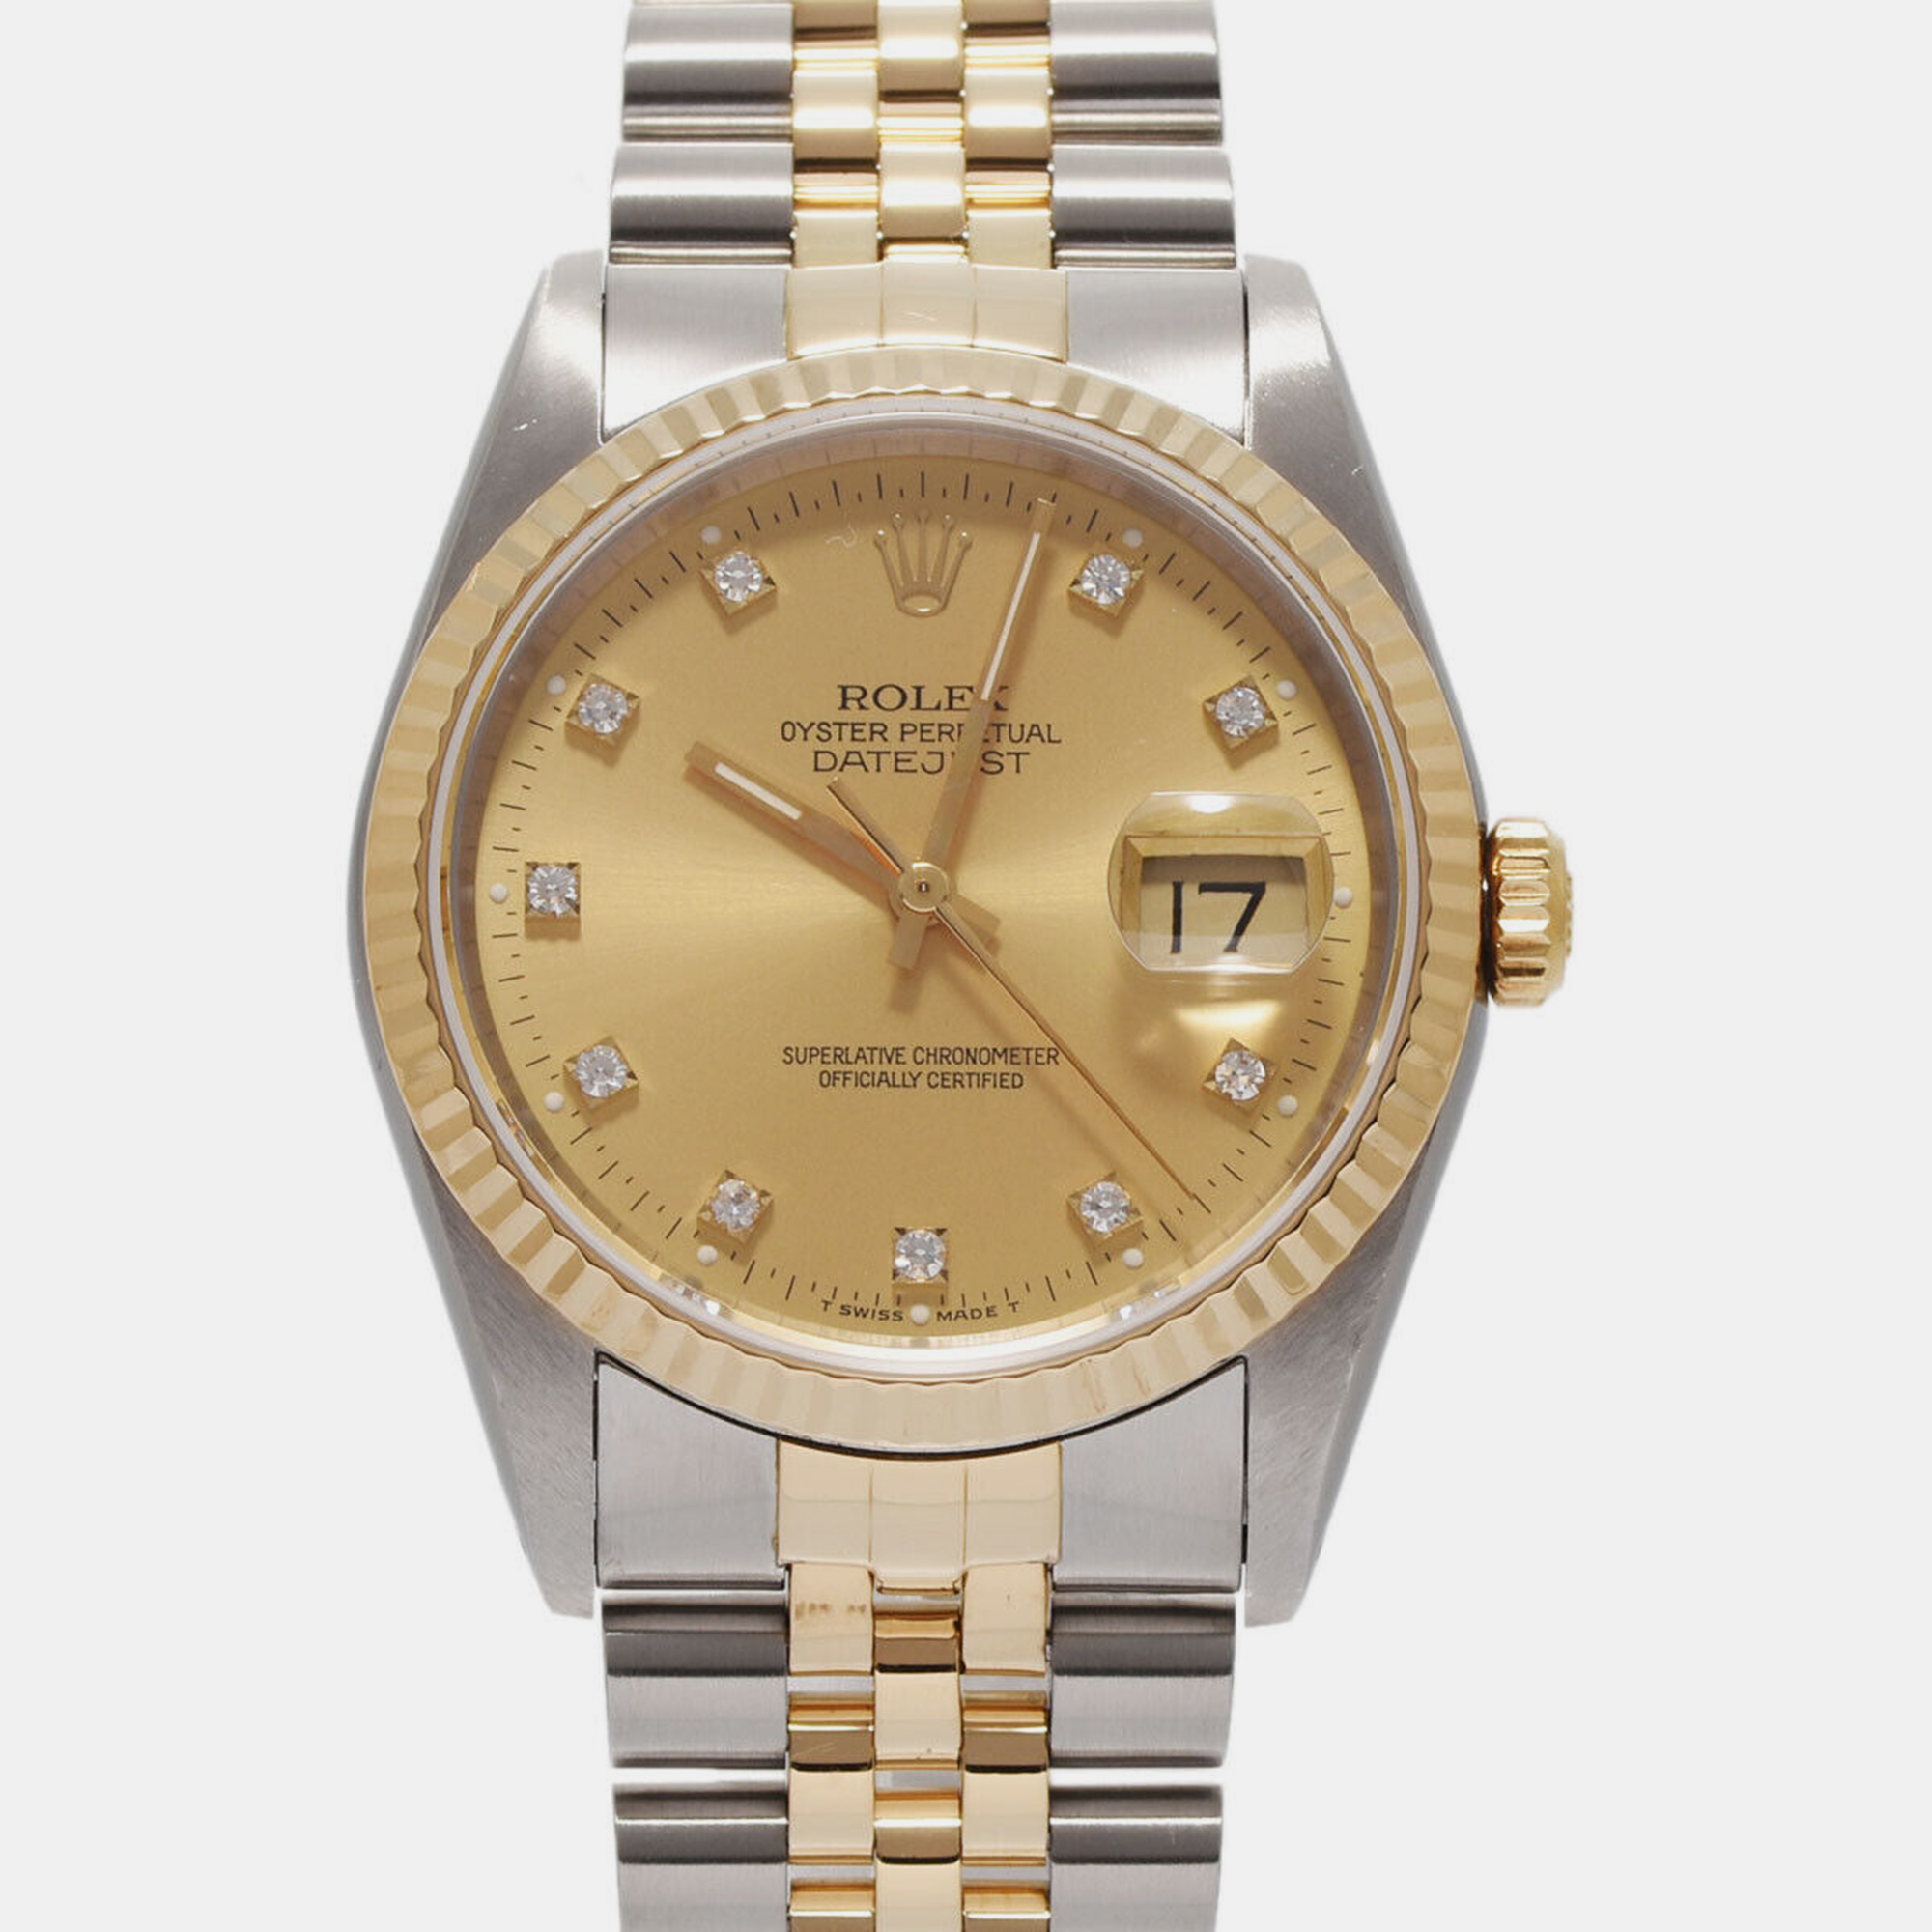 

Rolex Champagne Diamond 18k Yellow Gold Stainless Steel Datejust 16233 Automatic Men's Wristwatch 36 mm